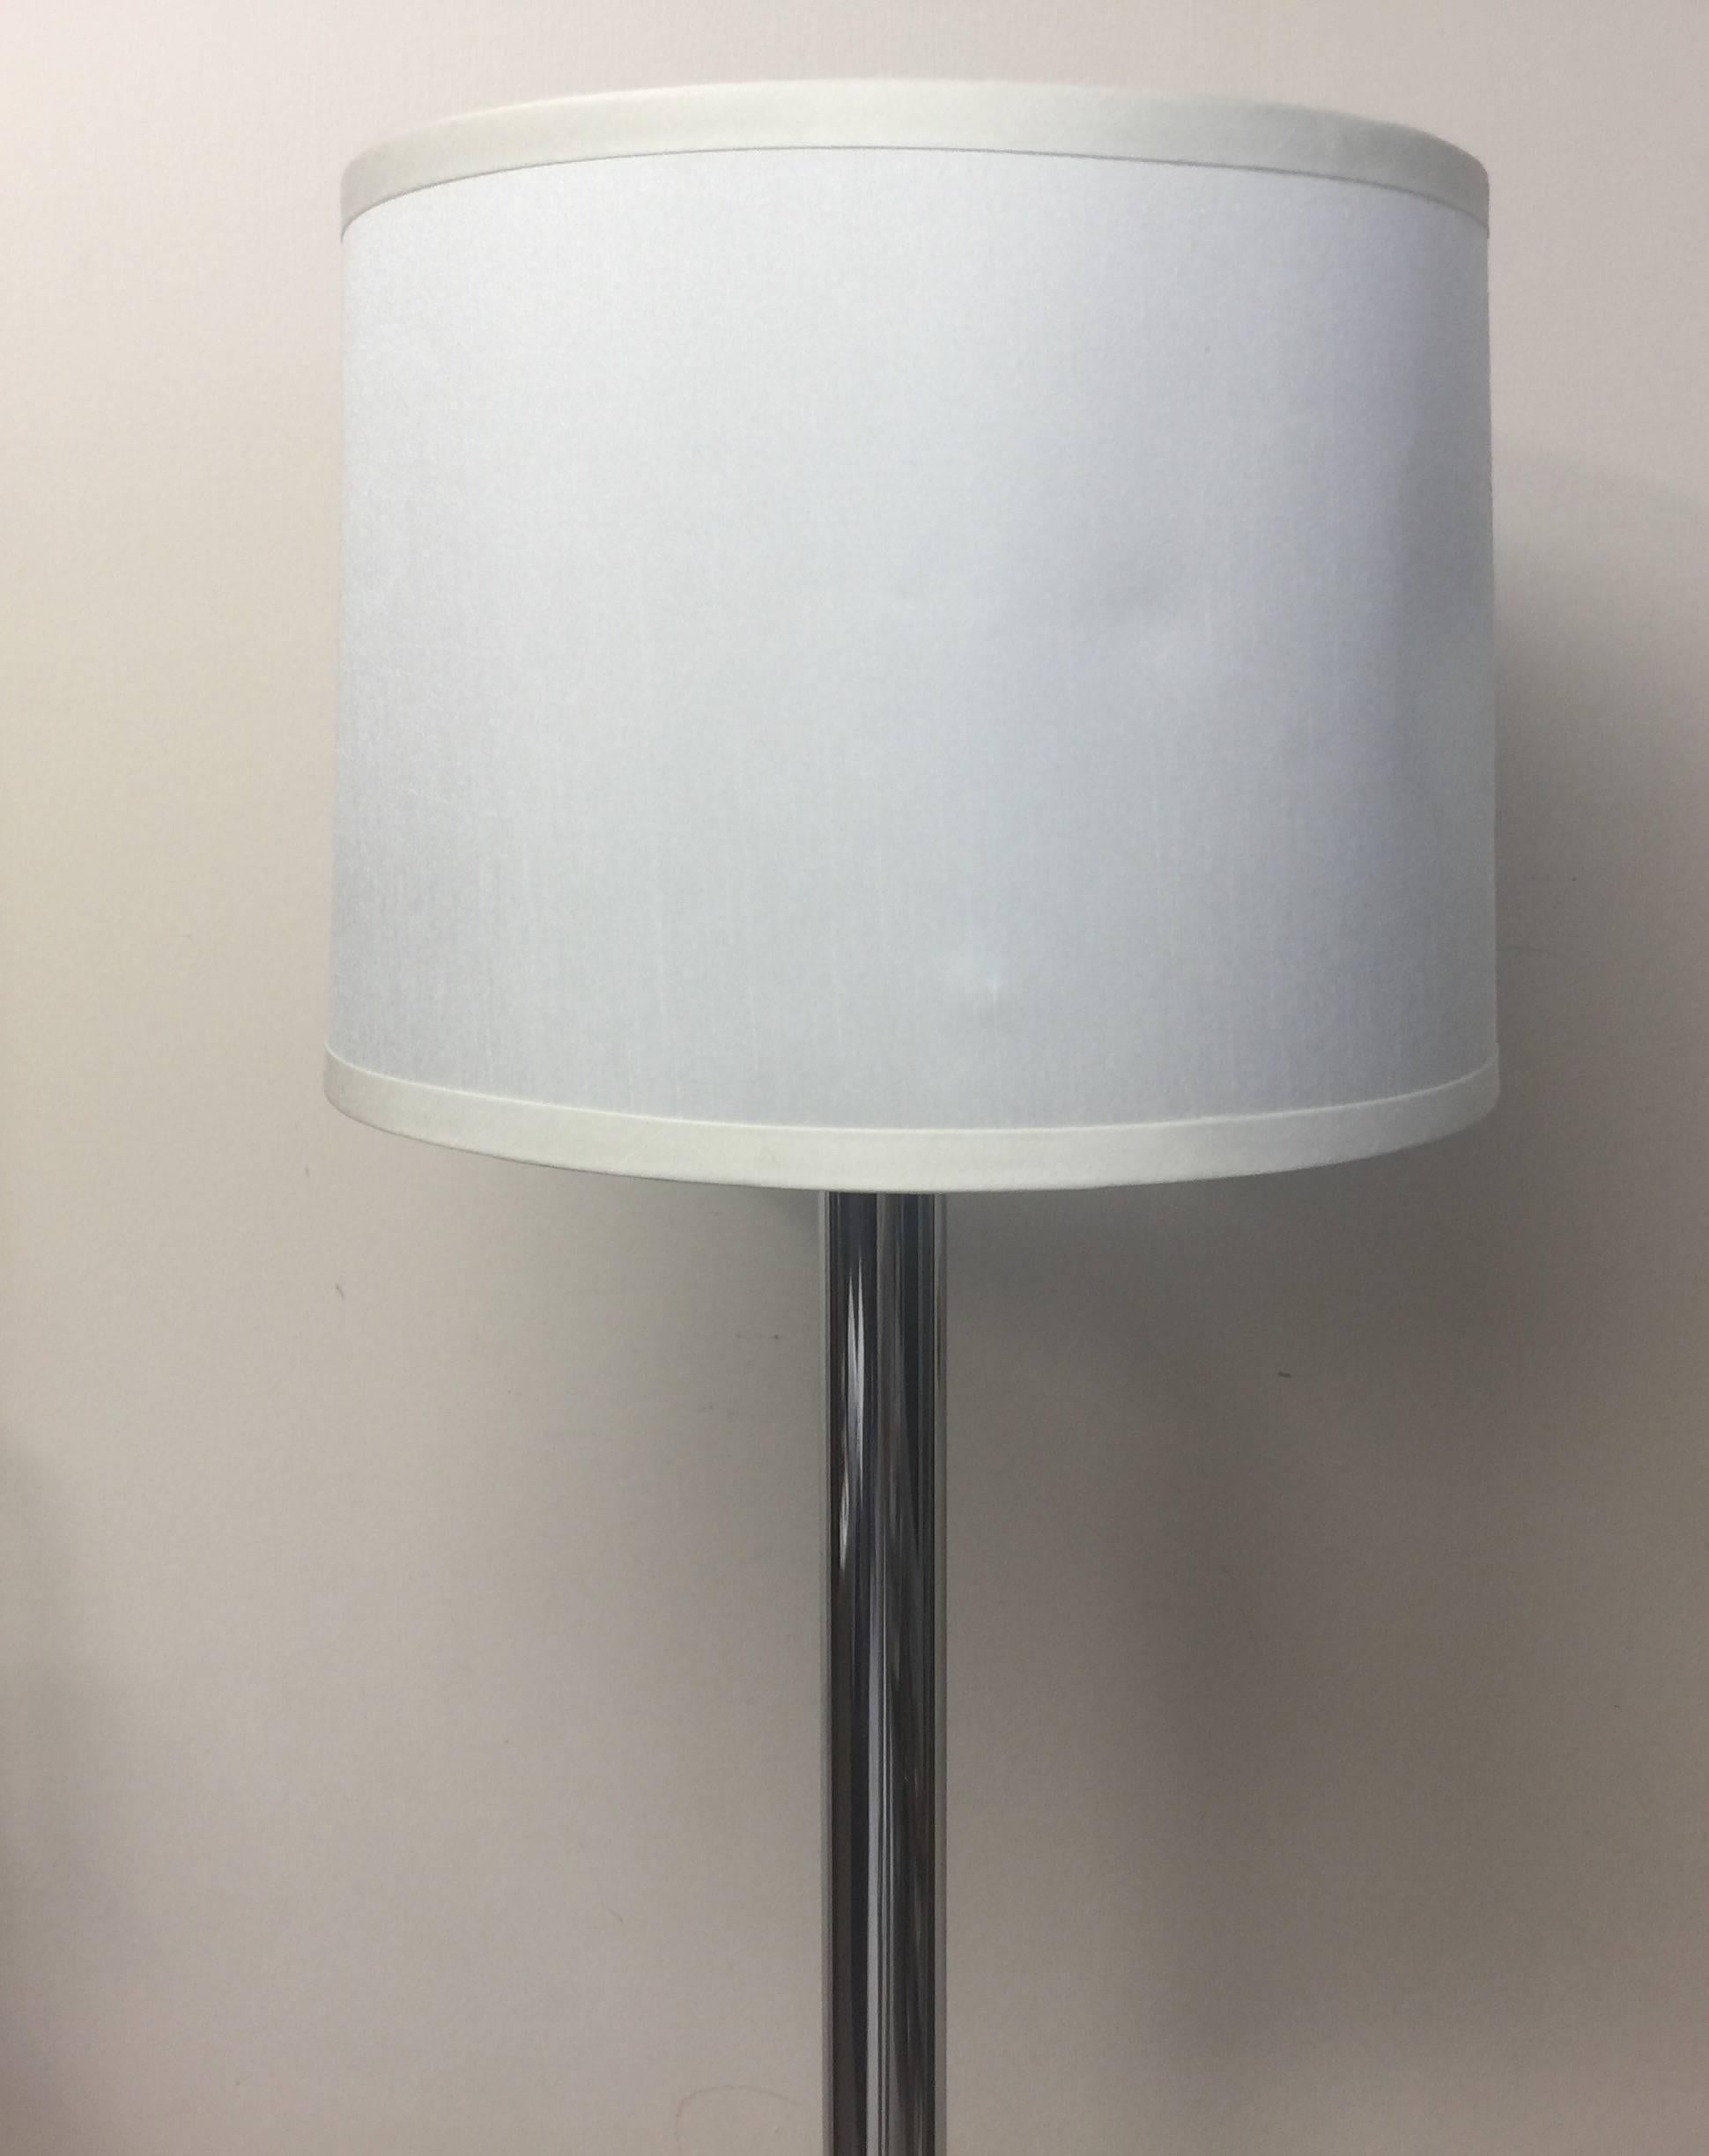 A polished chrome floor lamp with thick round base and cylindrical stem, USA, circa 1970. Unsigned.

Polished chrome floor lamp with round base. AMERICAN, circa 1960-1970.

Unmarked; similar in style to lamps by Sonneman, Nessen and